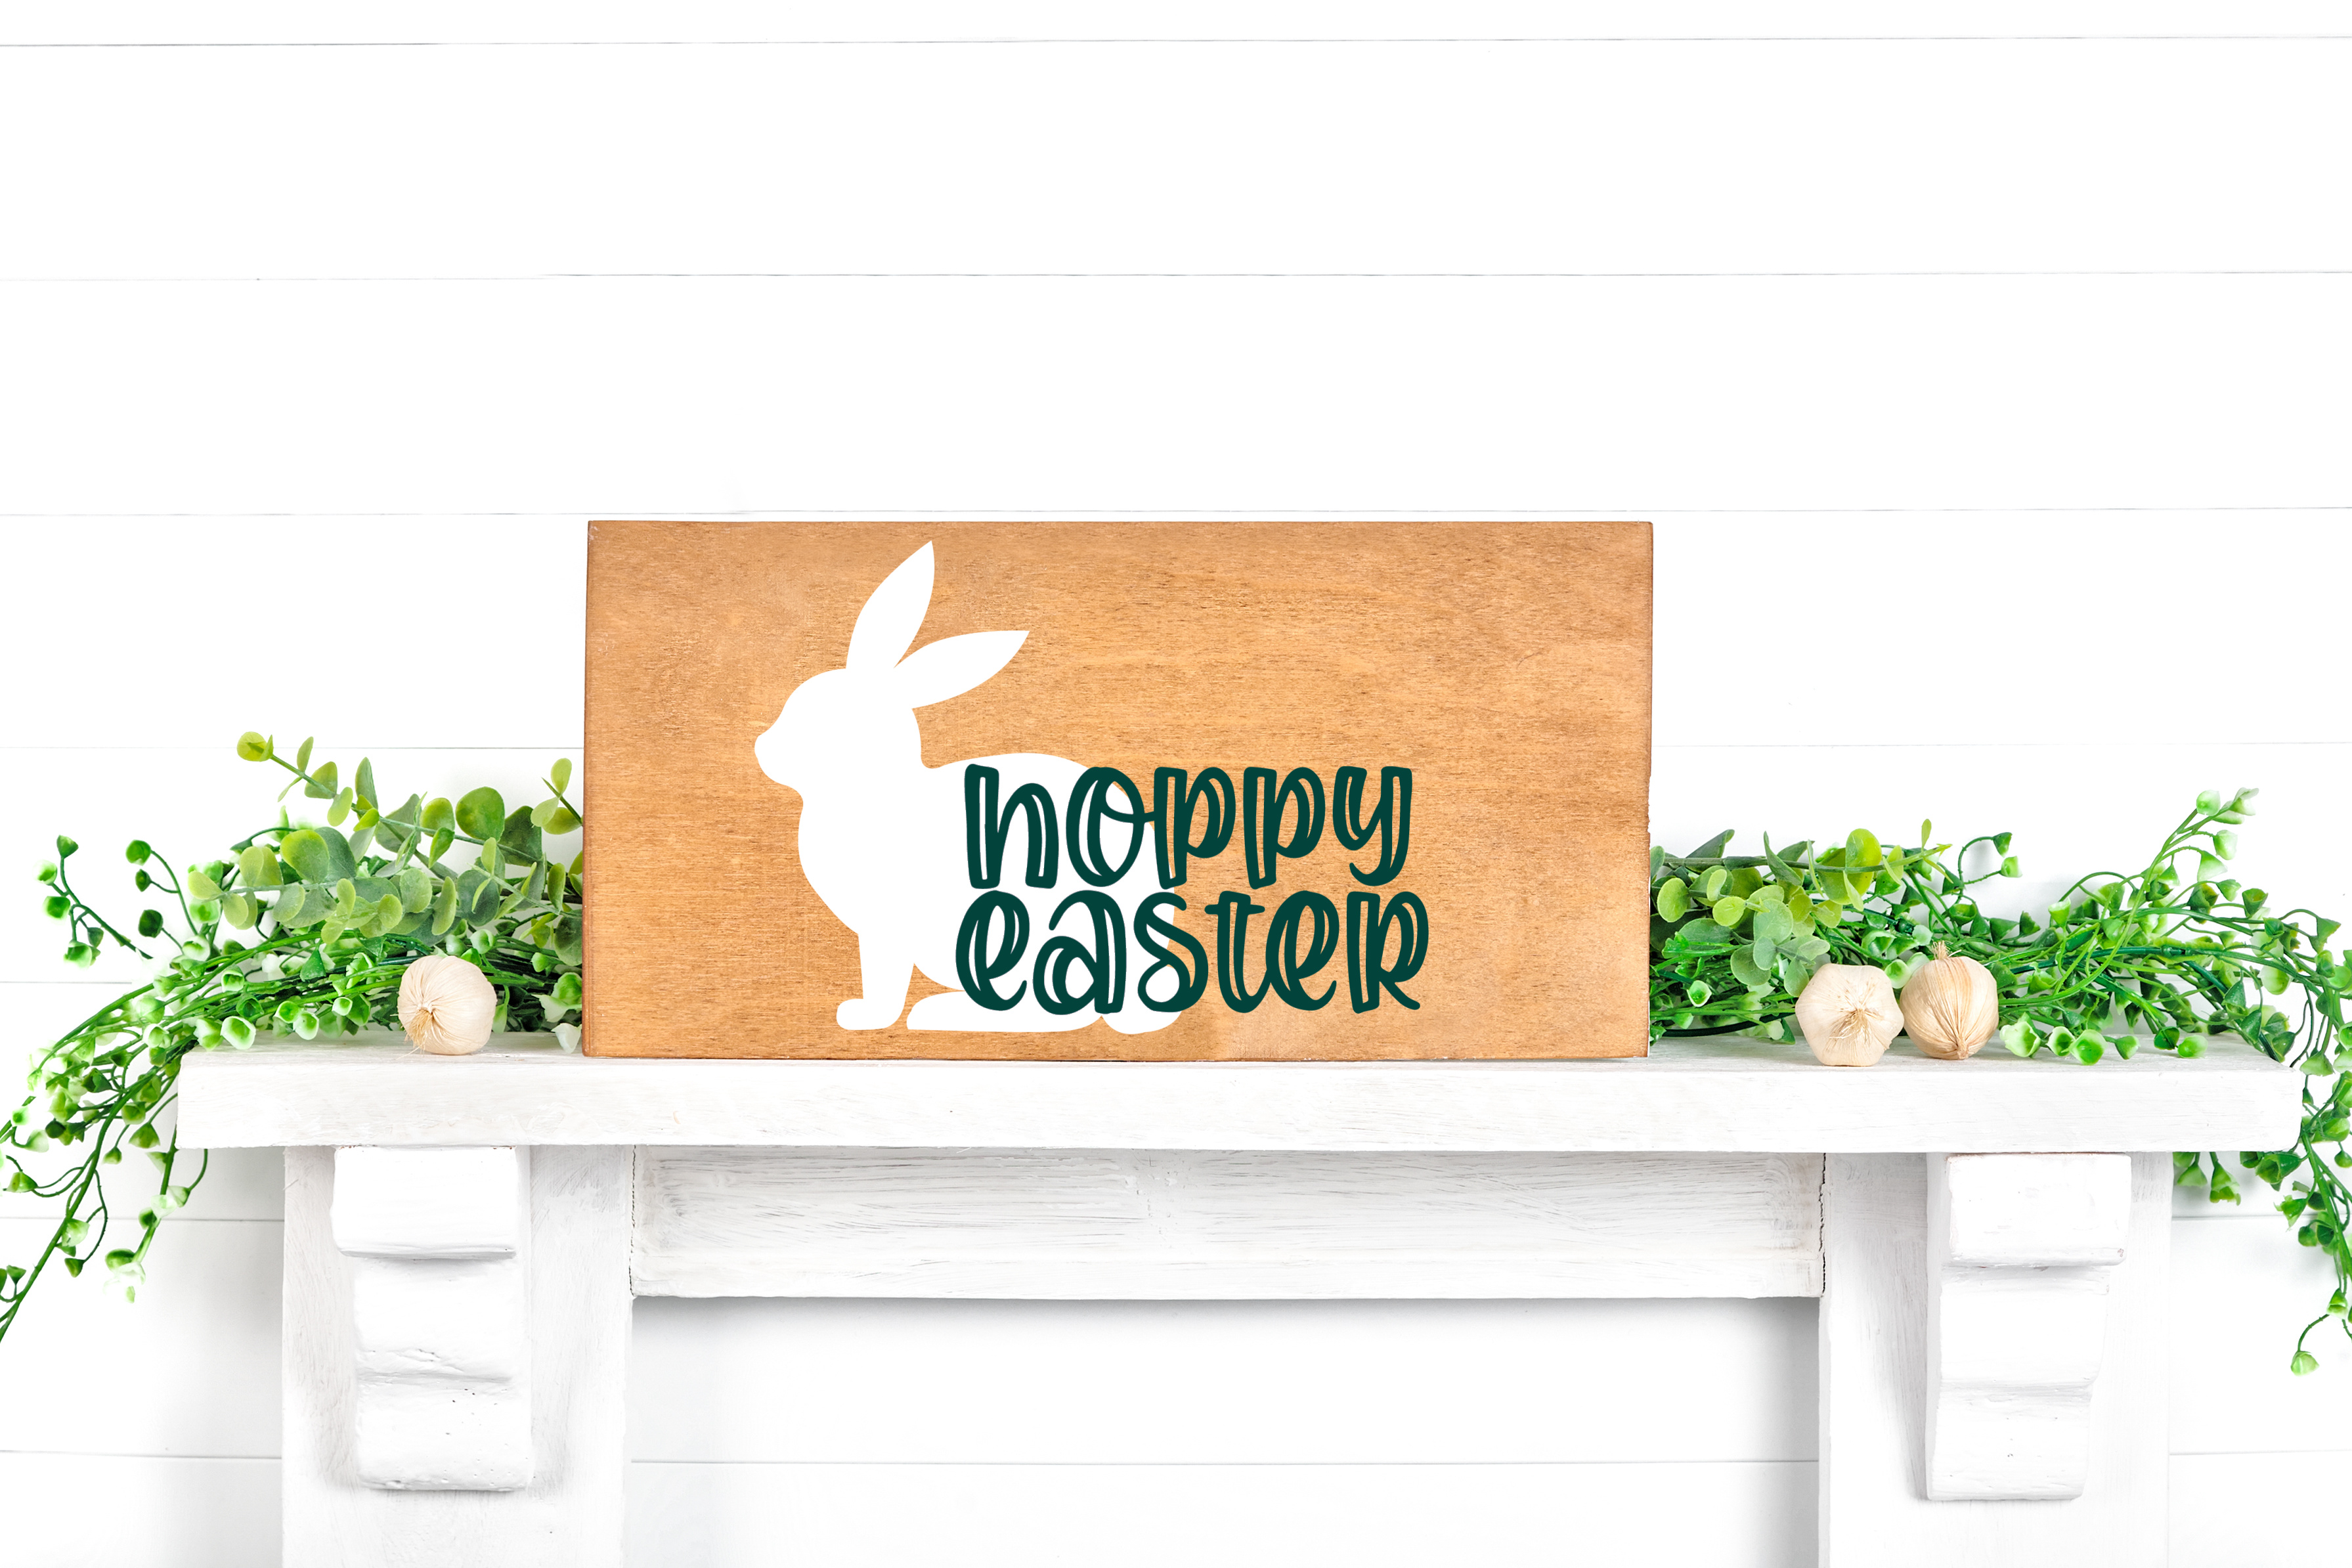 Wood sign with Hoppy Easter SVG design sitting on a white wall shelf